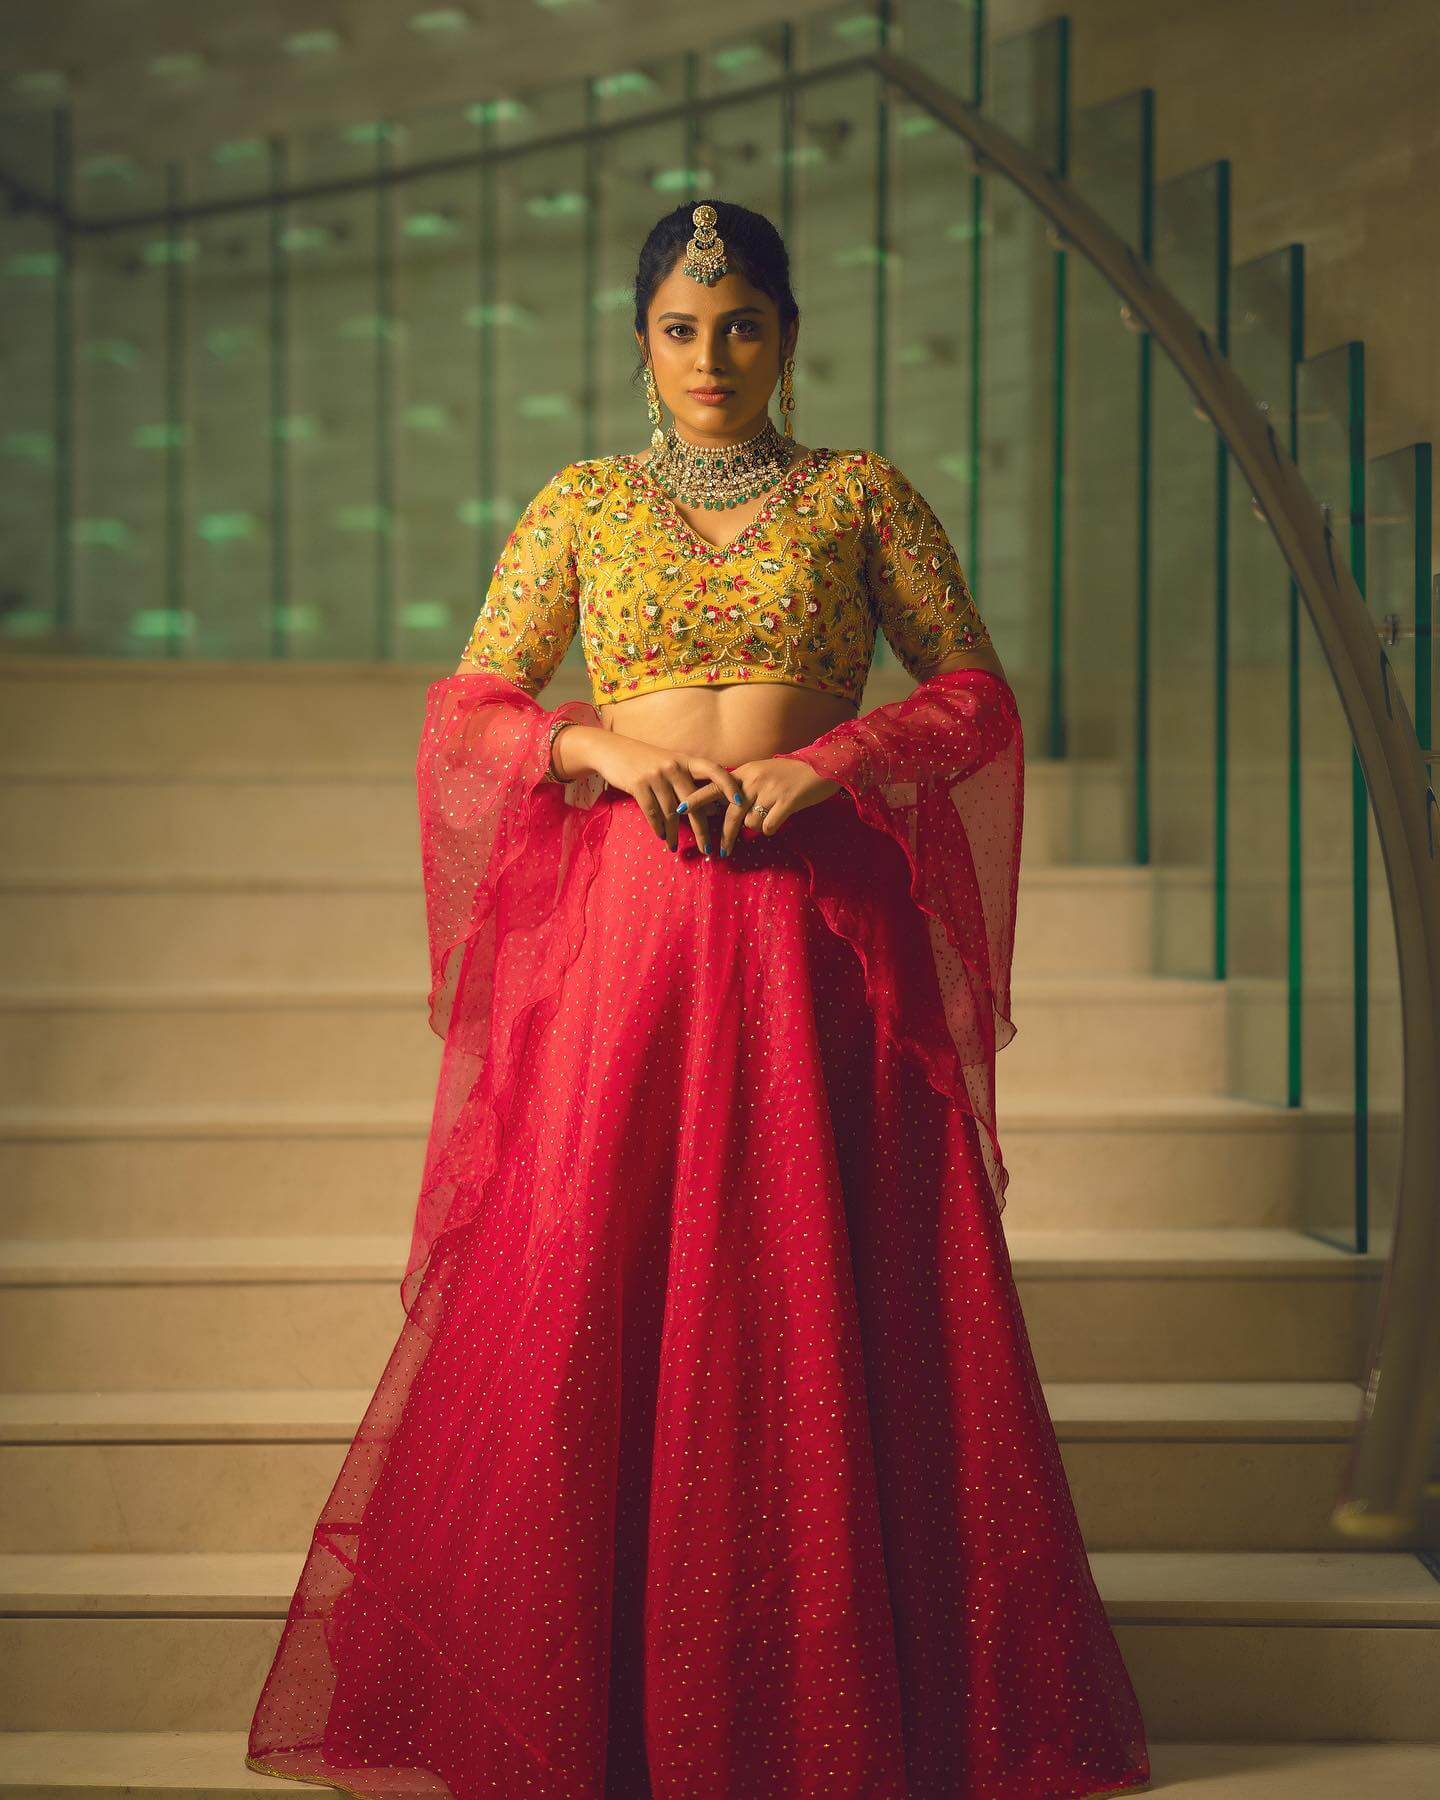 Nandita Swetha  Gorgeous Look In Pink Golden Embellished Lehenga Paired With Yellow Blouse